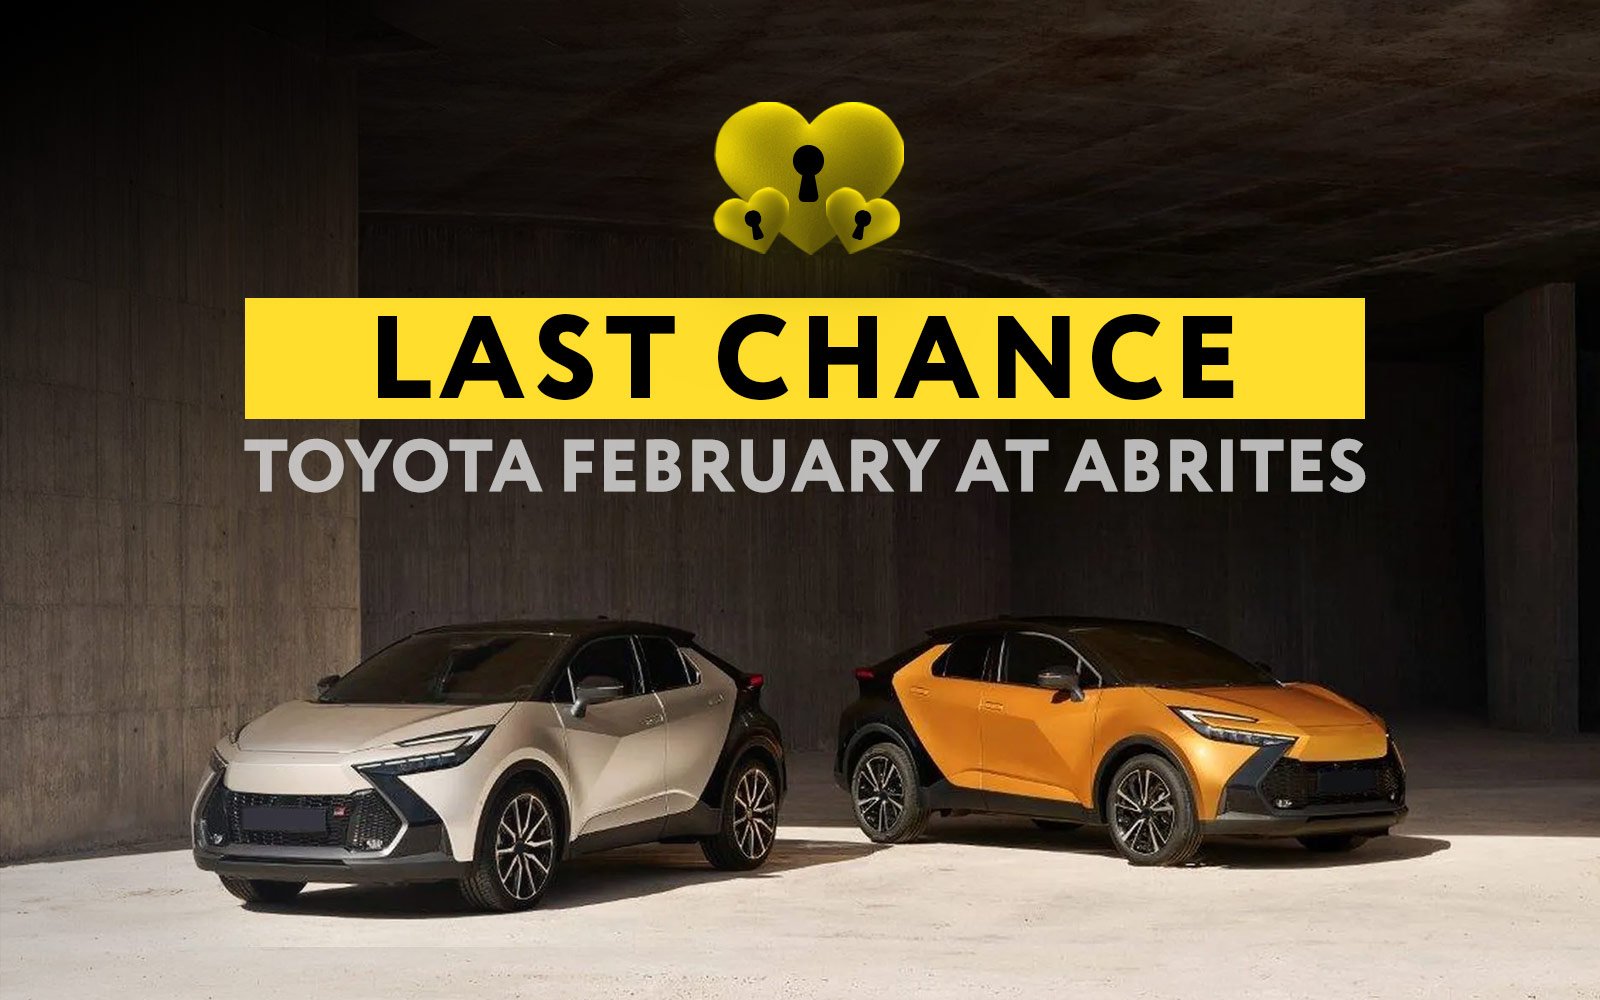 LAST CHANCE! THE TOYOTA LOVE AT FIRST KEY ABRITES FEBRUARY PROMO IS ENDING TONIGHT!